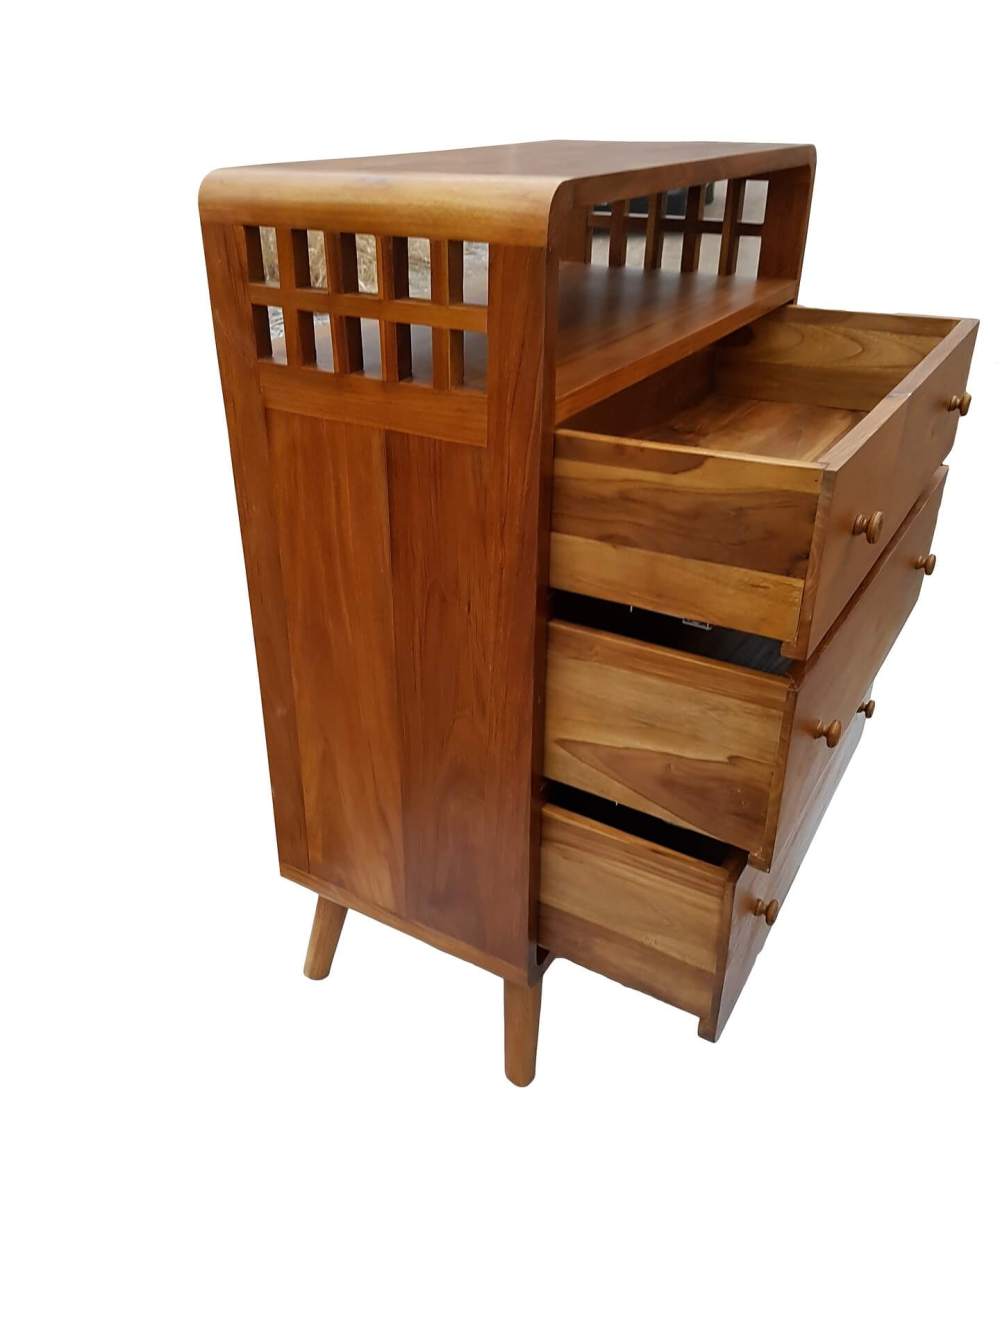 Why have chest drawers become a home essential?